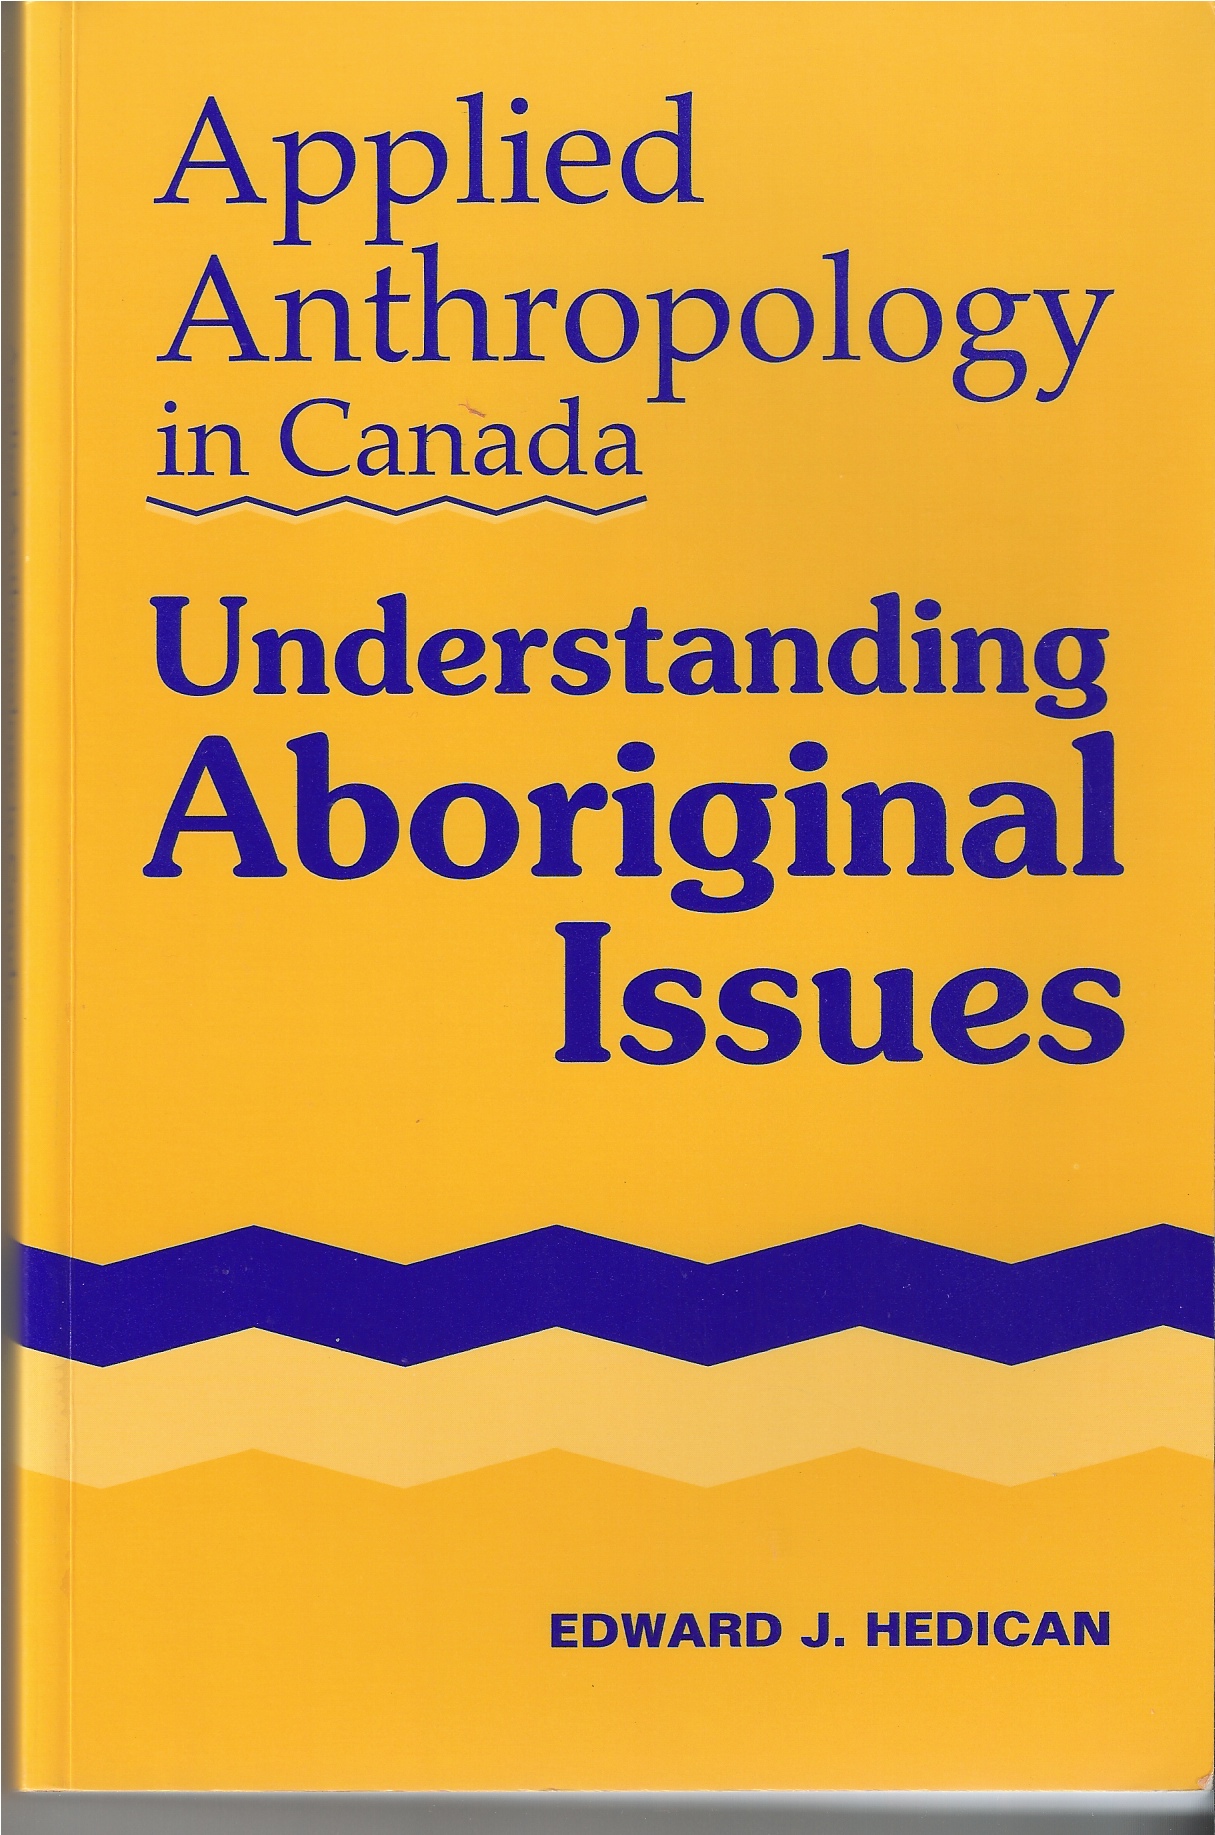 HEDICAN, EDWARD J. - Applied Anthropology in Canada Understanding Aboriginal Issues